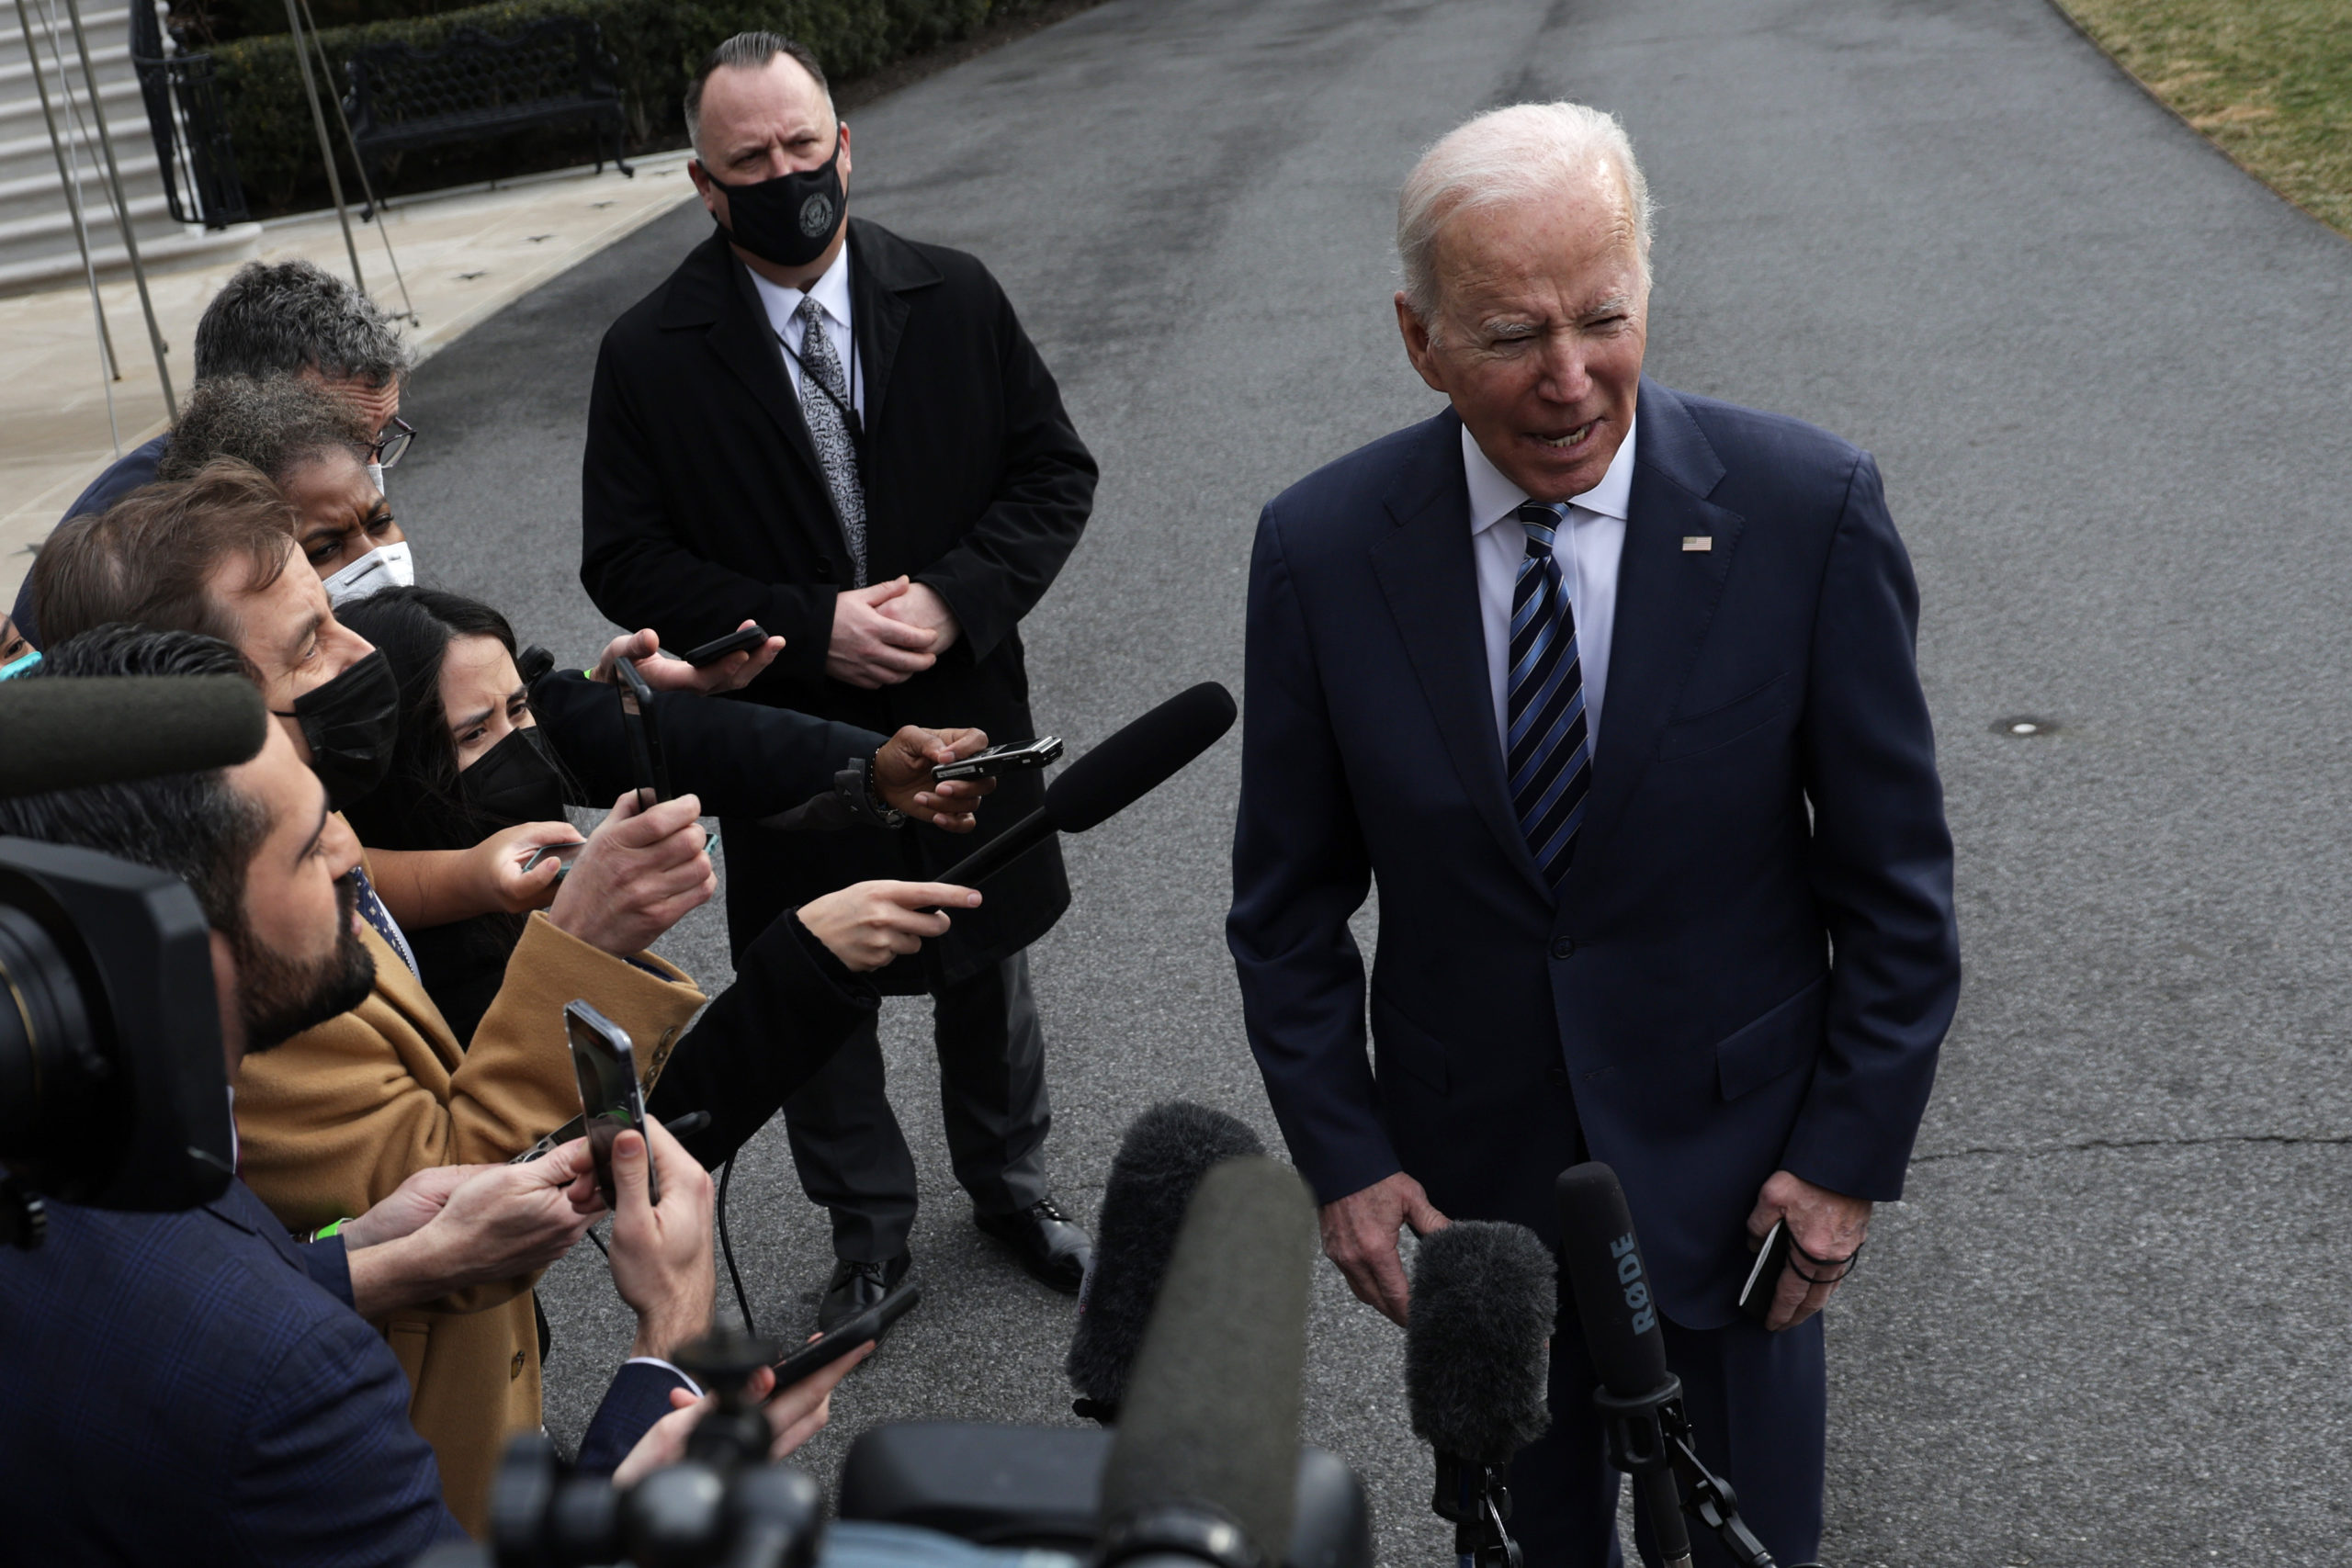 WASHINGTON, DC - FEBRUARY 17: U.S. President Joe Biden speaks to members of the press prior to a departure for Cleveland, Ohio from the White House on February 17, 2022 in Washington, DC. President Biden predicted the likelihood of a Russian invasion to Ukraine is high and “in a matter of days.” (Photo by Alex Wong/Getty Images)